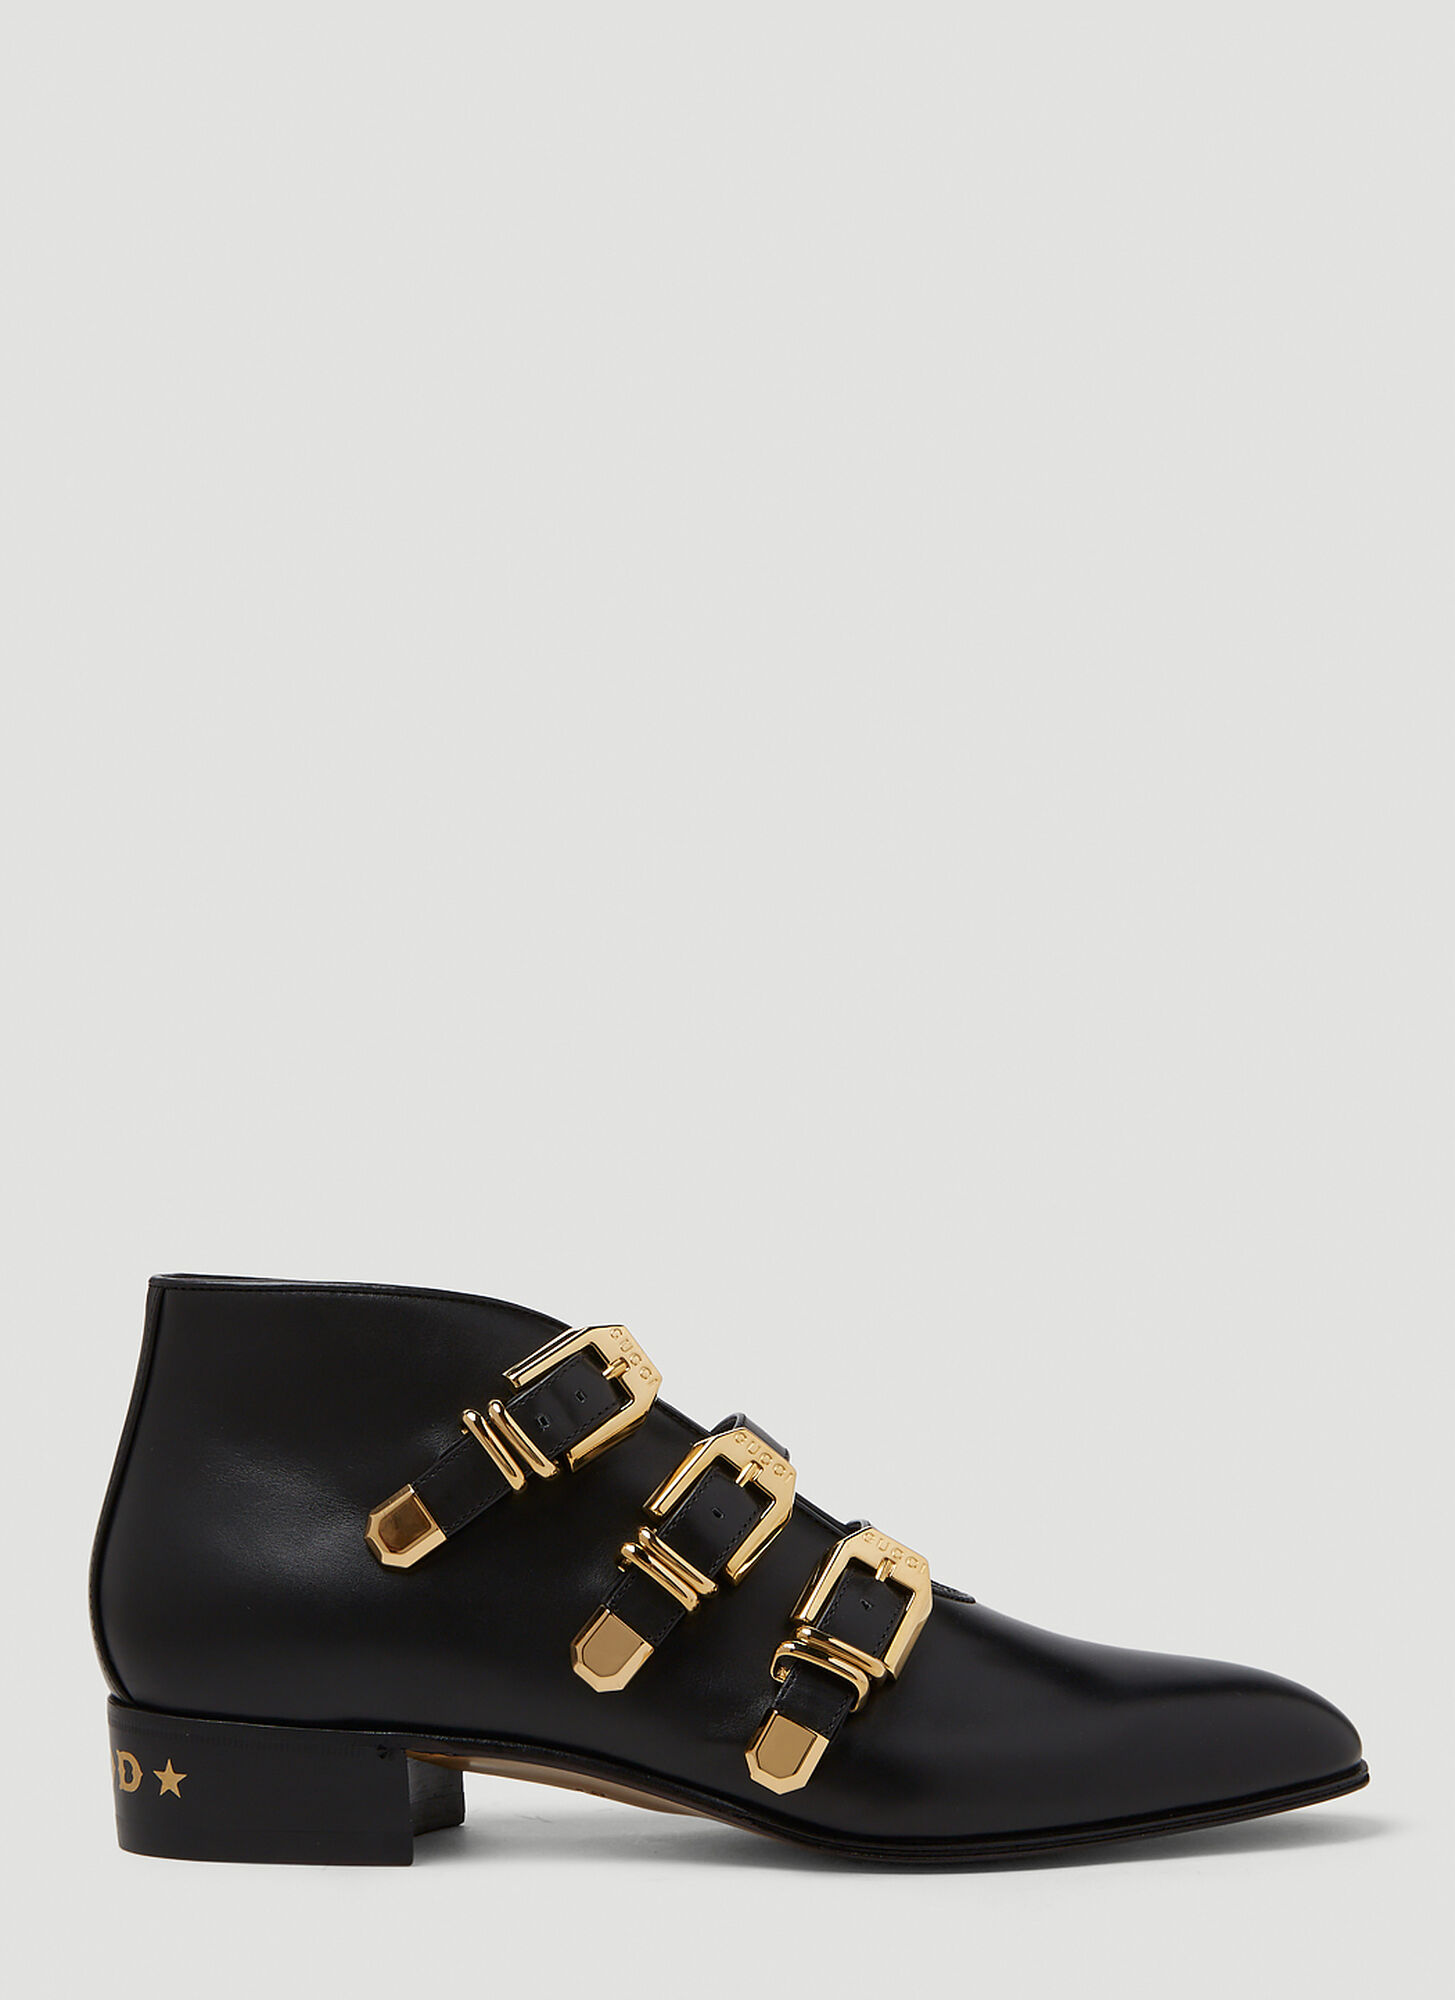 Gucci Hollywood Buckle Ankle Boots Female Black In New